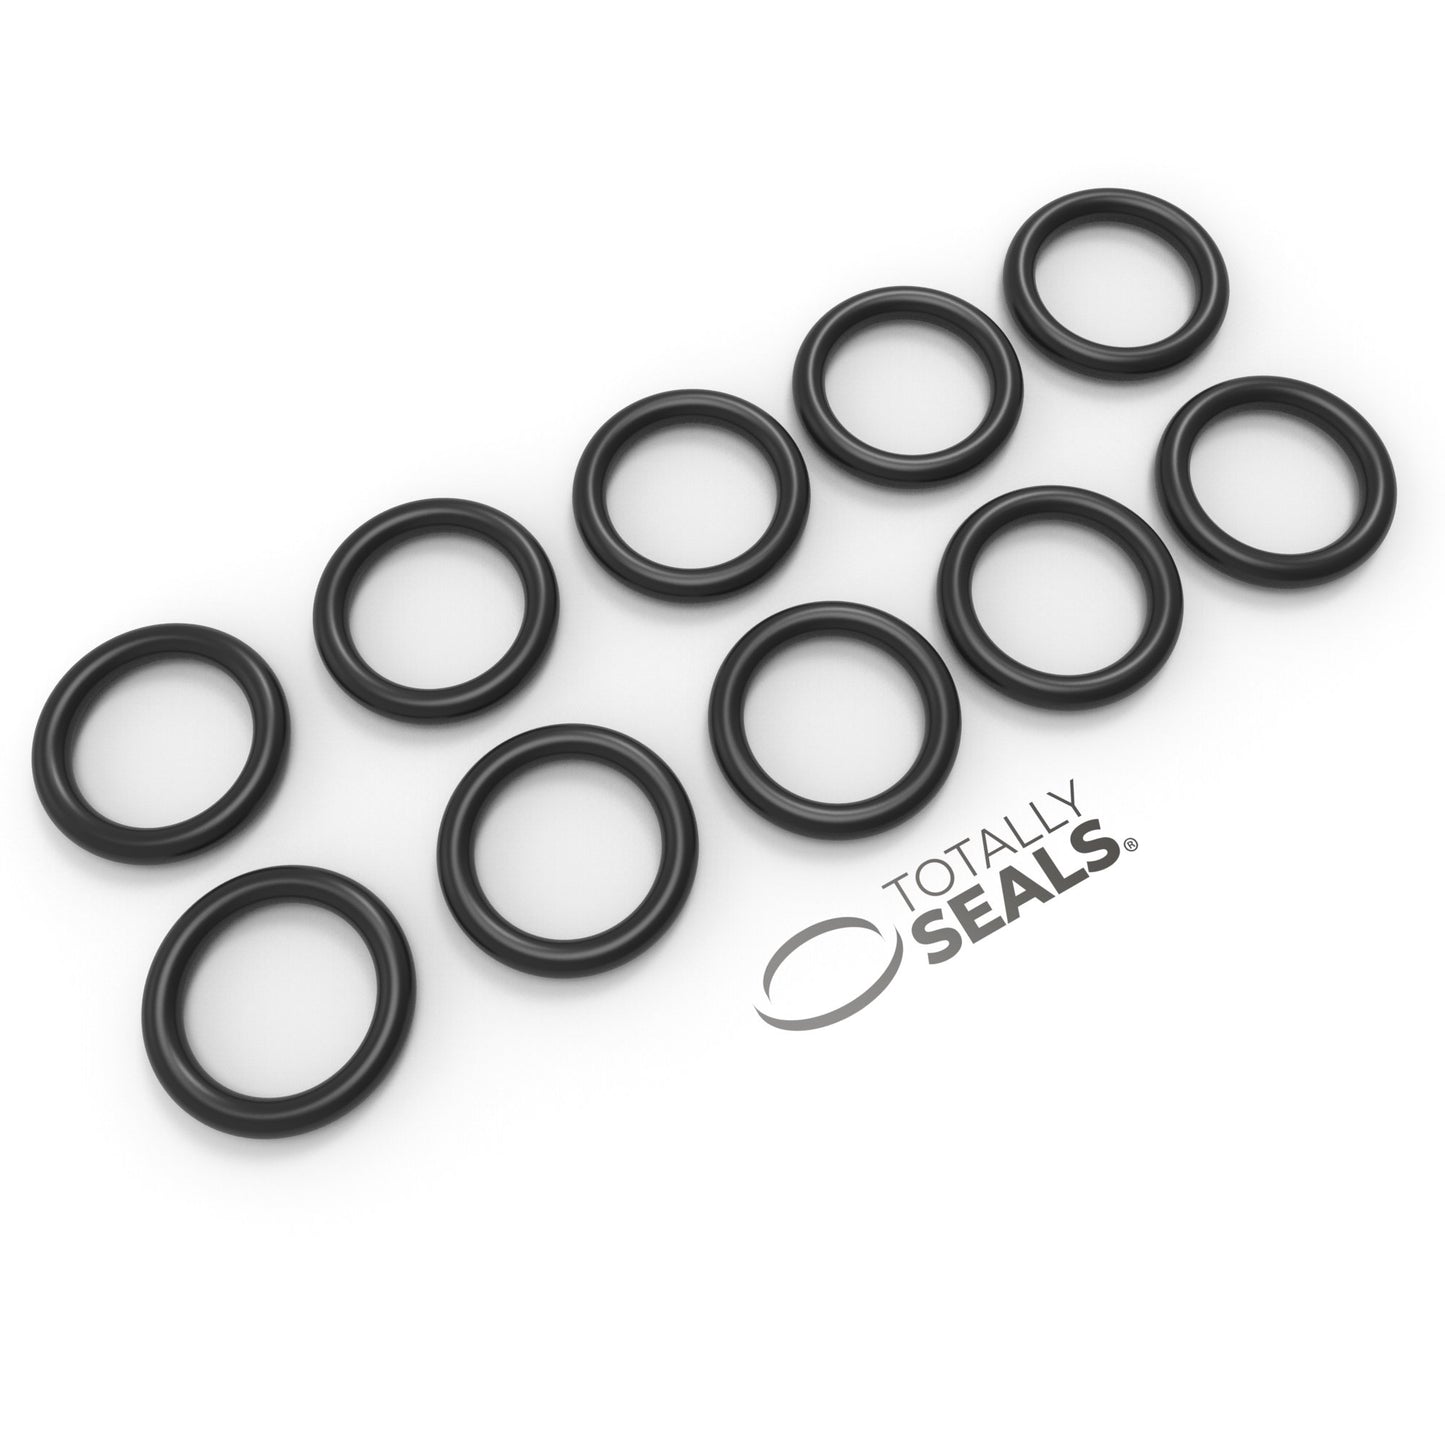 55mm x 3mm (61mm OD) Nitrile O-Rings - Totally Seals®